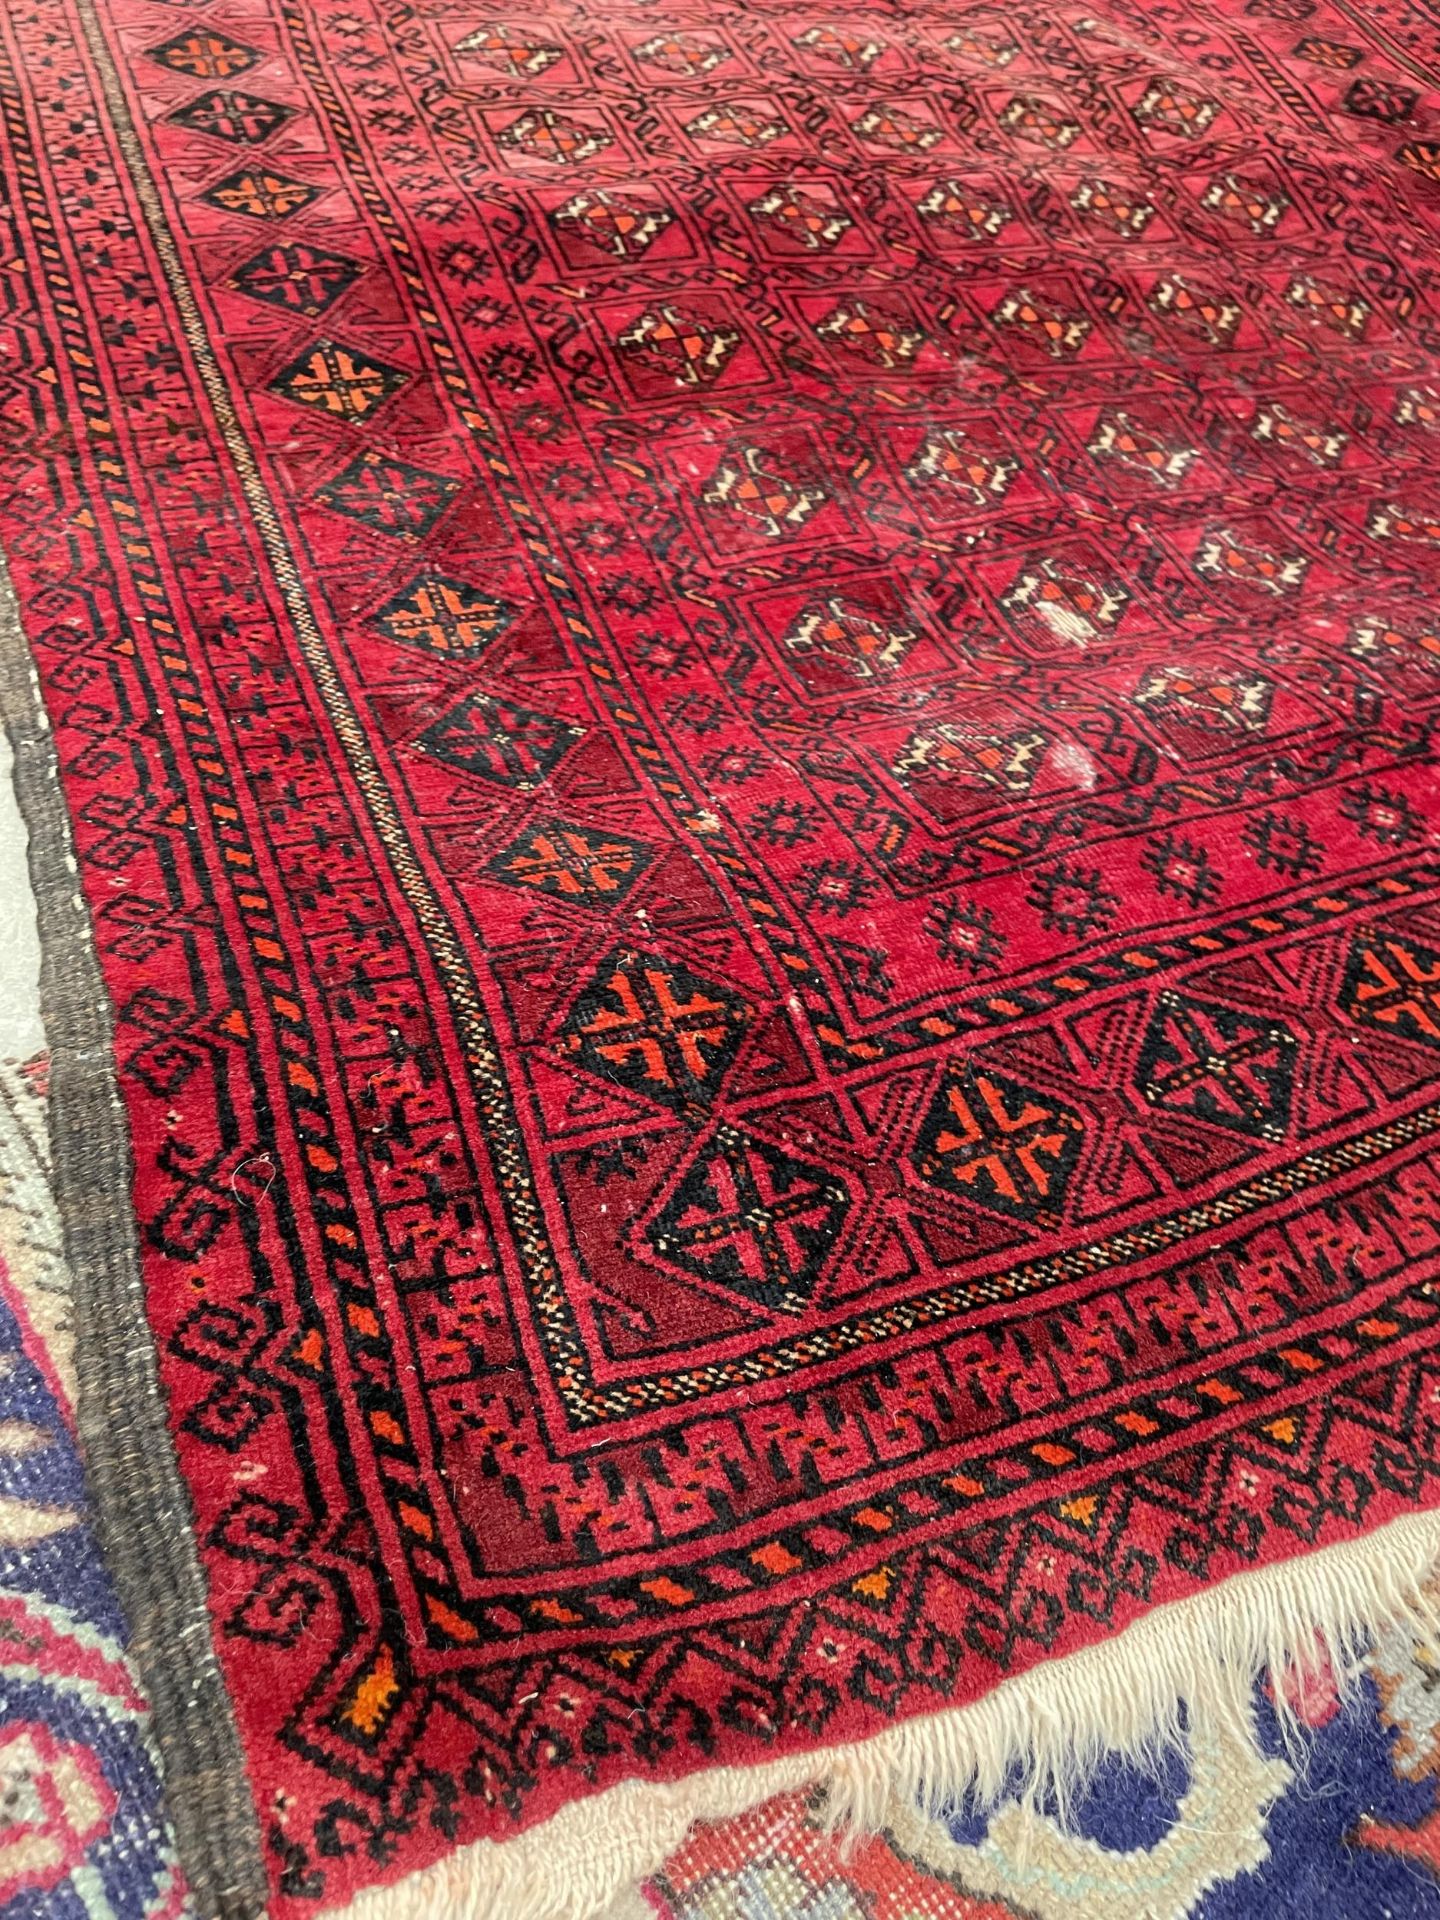 A SMALL RED PATTERNED FRINGED RUG - Bild 2 aus 3